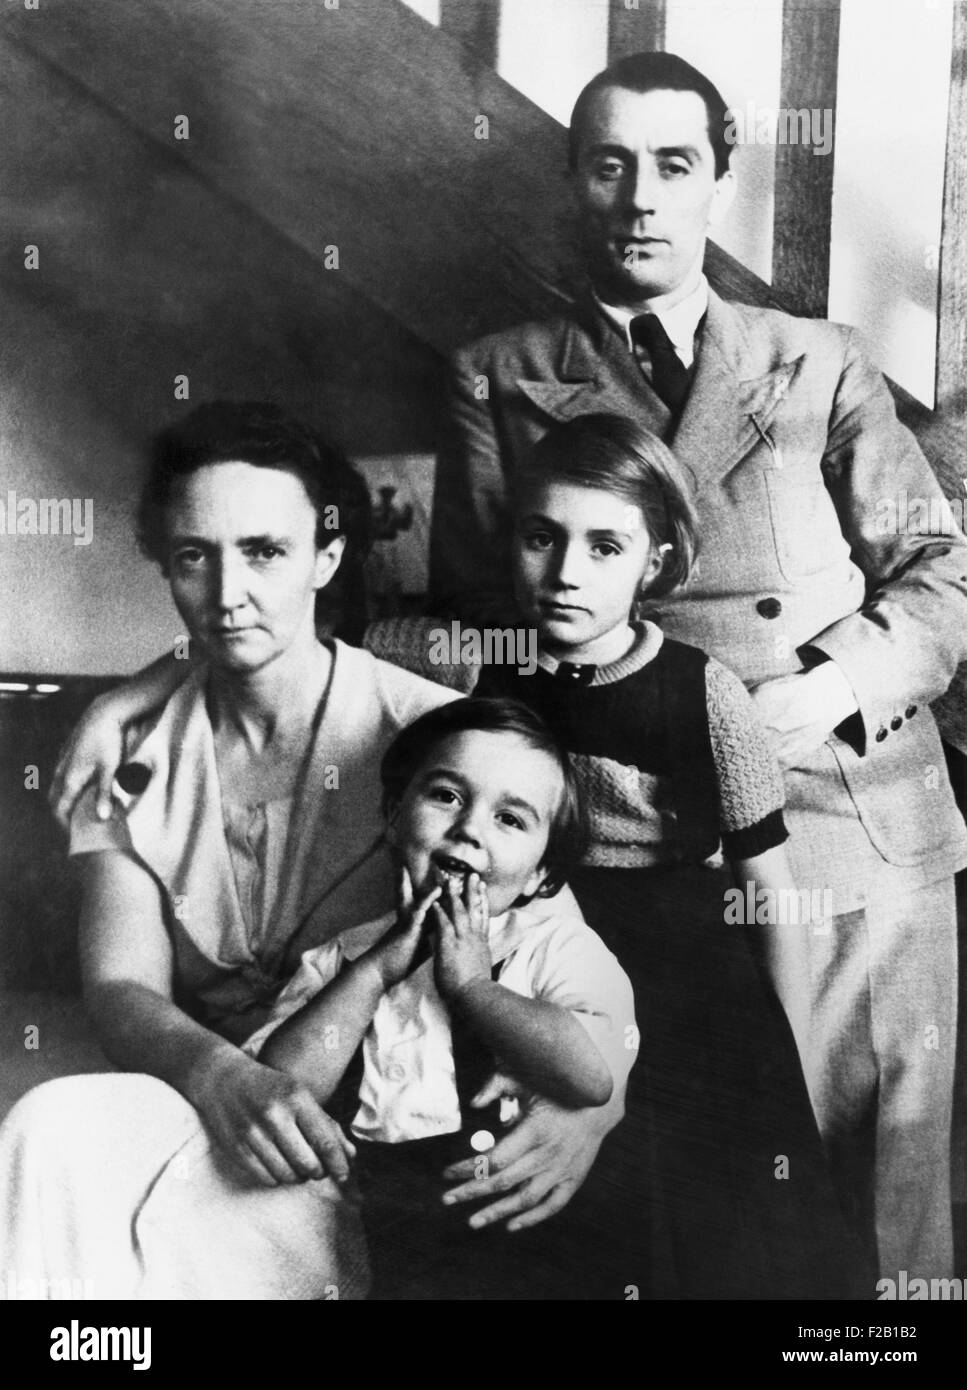 Irene and Frederic Joliot-Curie with their children, Helene and Pierre, Nov. 1935. The couple won the Nobel Prize in Chemistry for creating new radioactive substances to which do not exist in nature. (CSU_2015_8_618) Stock Photo